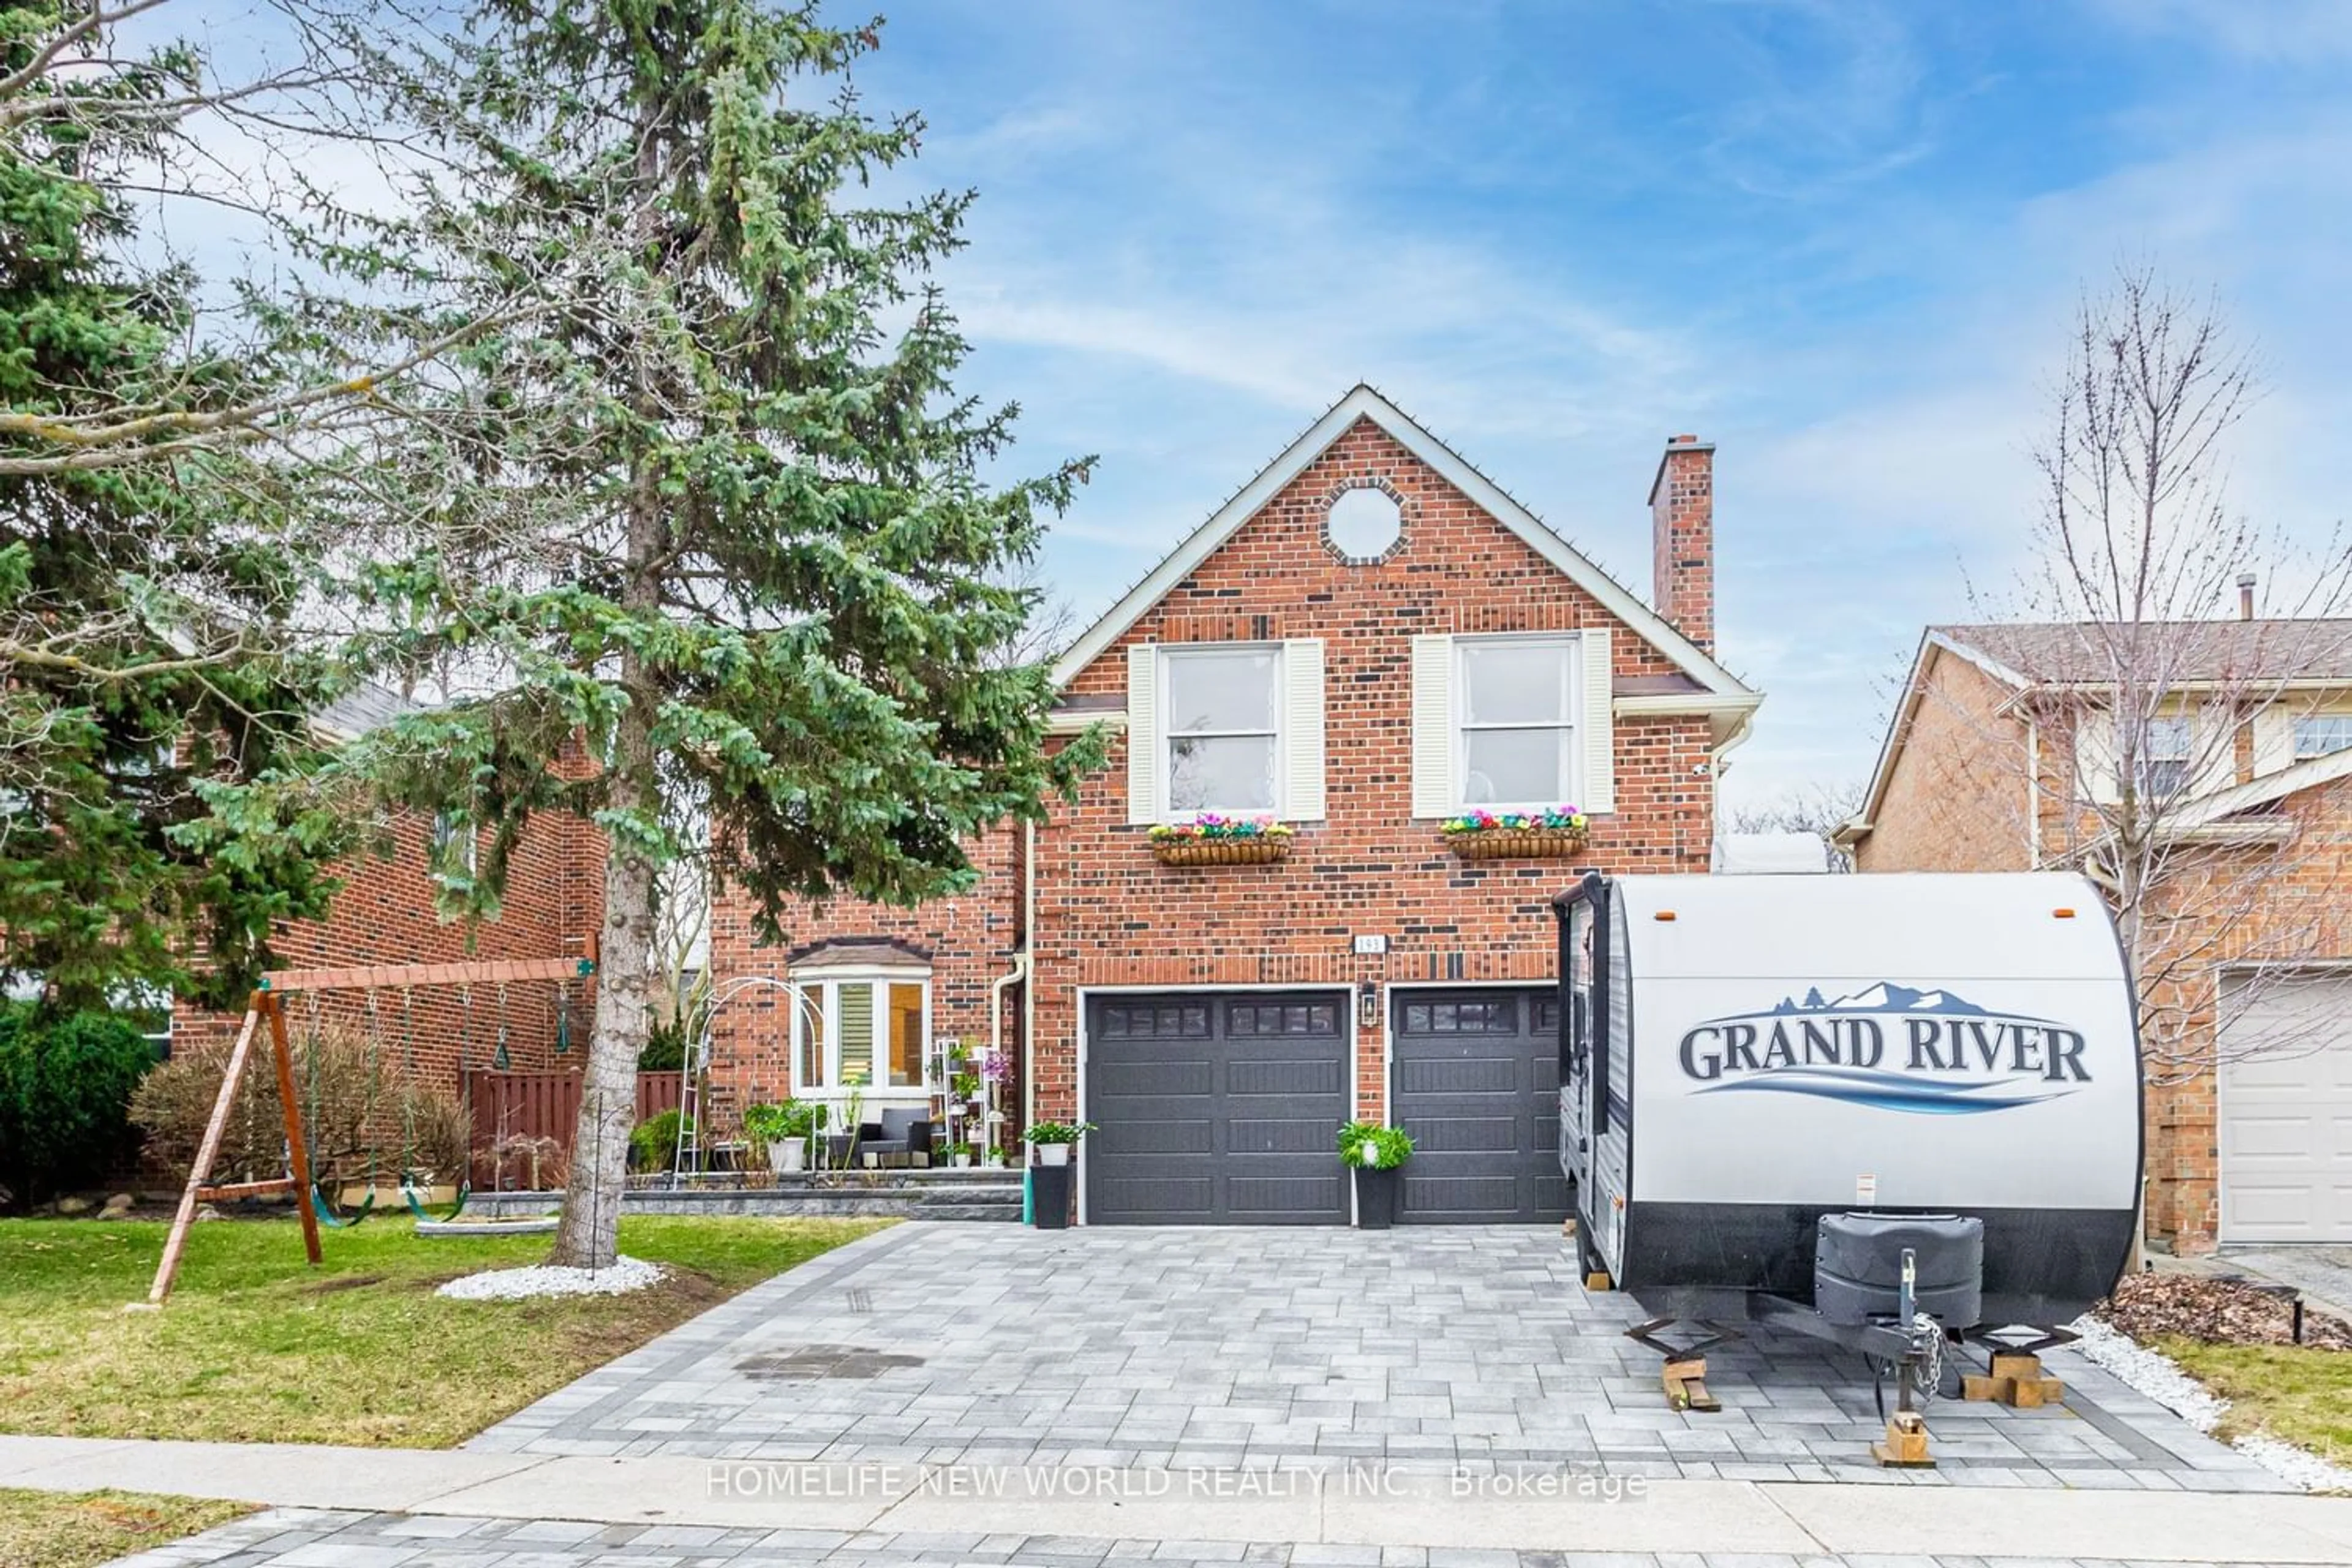 Home with brick exterior material for 193 Fincham Ave, Markham Ontario L3P 4B4